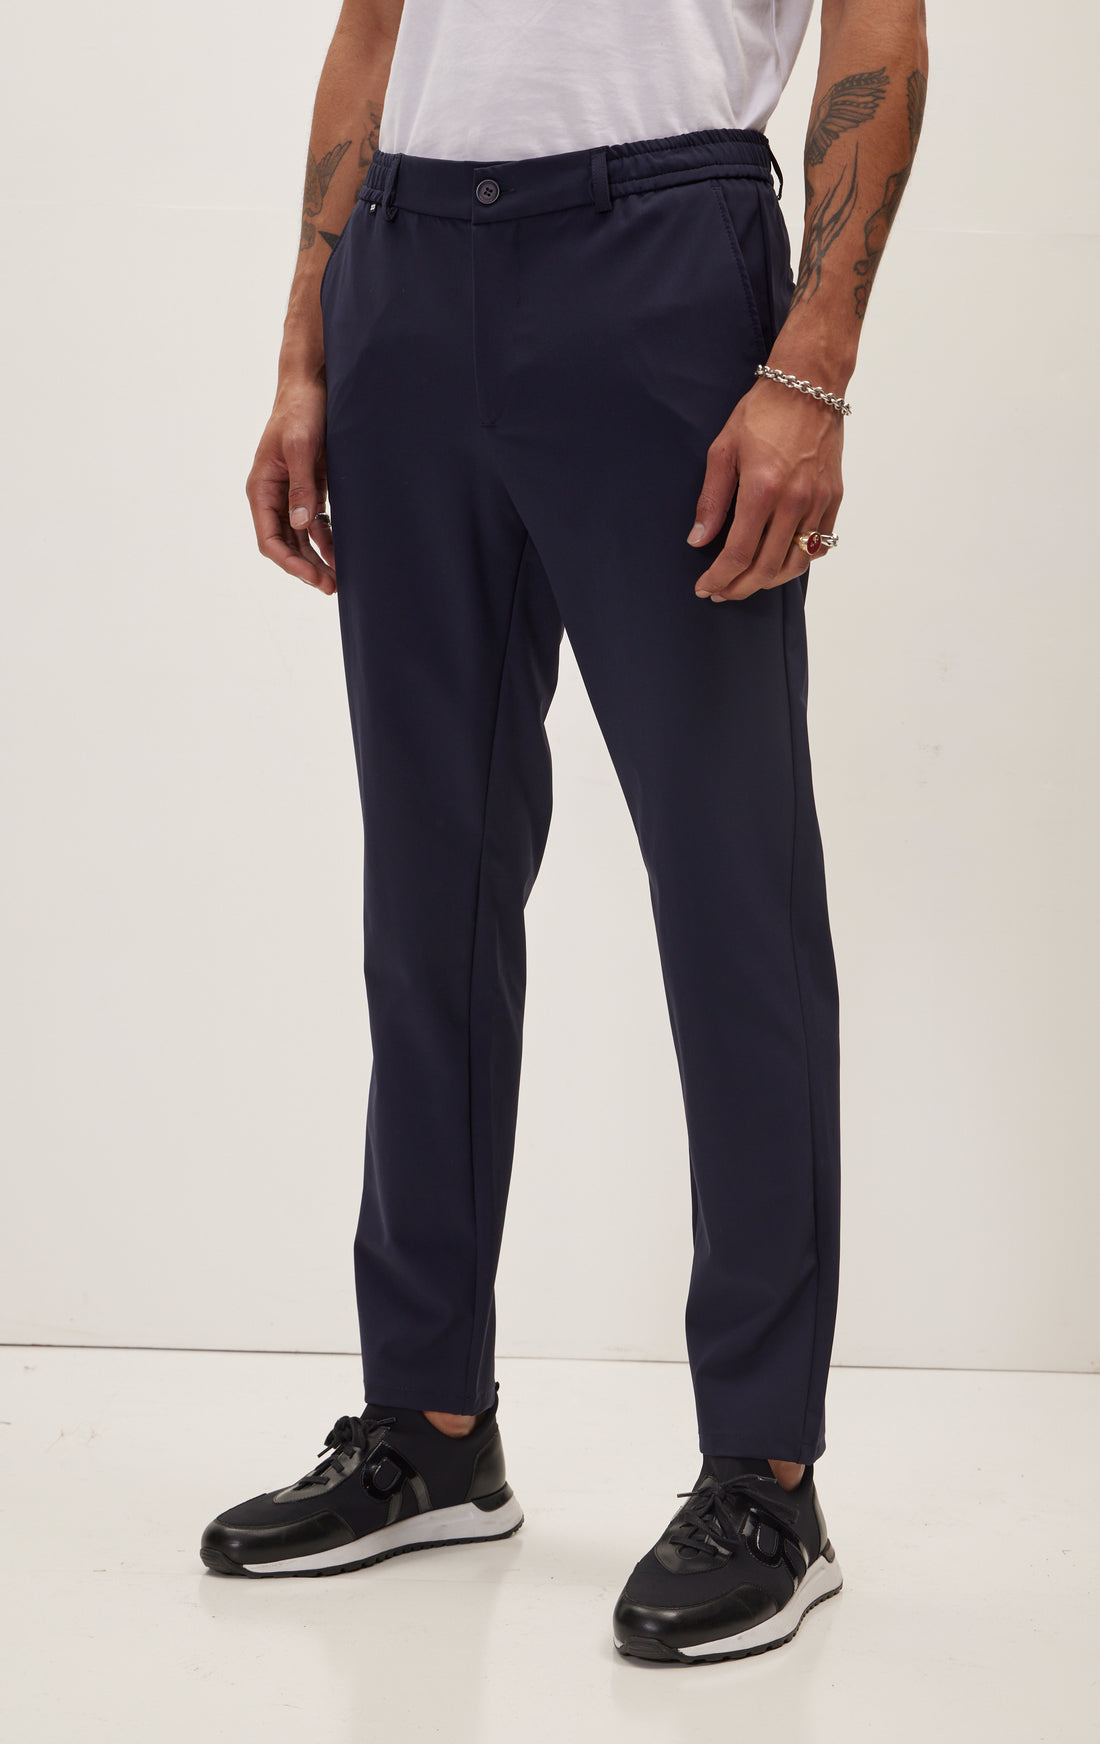 Wrinkle Free Tapered Travel Pants - Navy